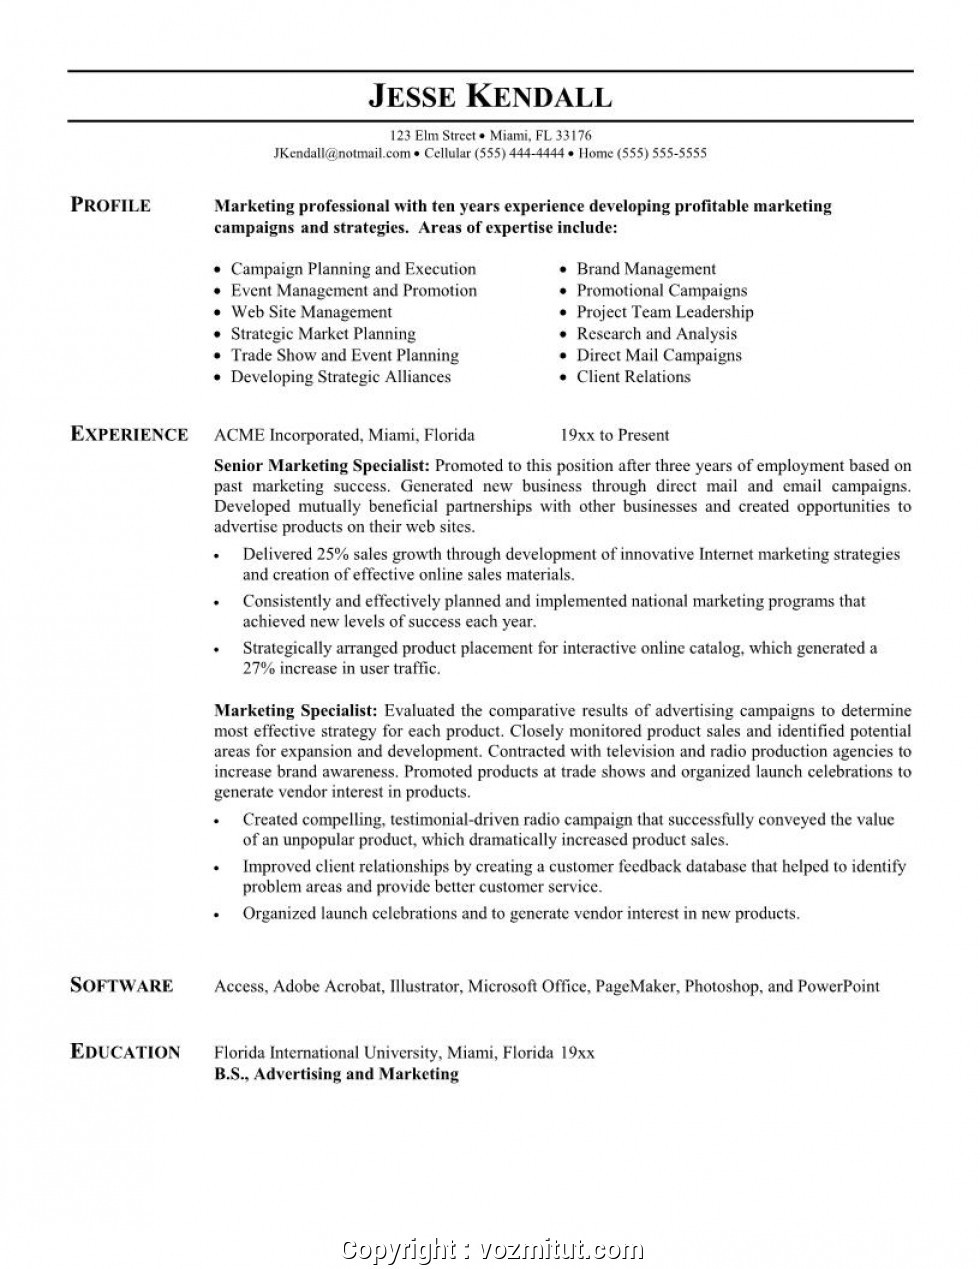 best sample resume for experienced marketing professional